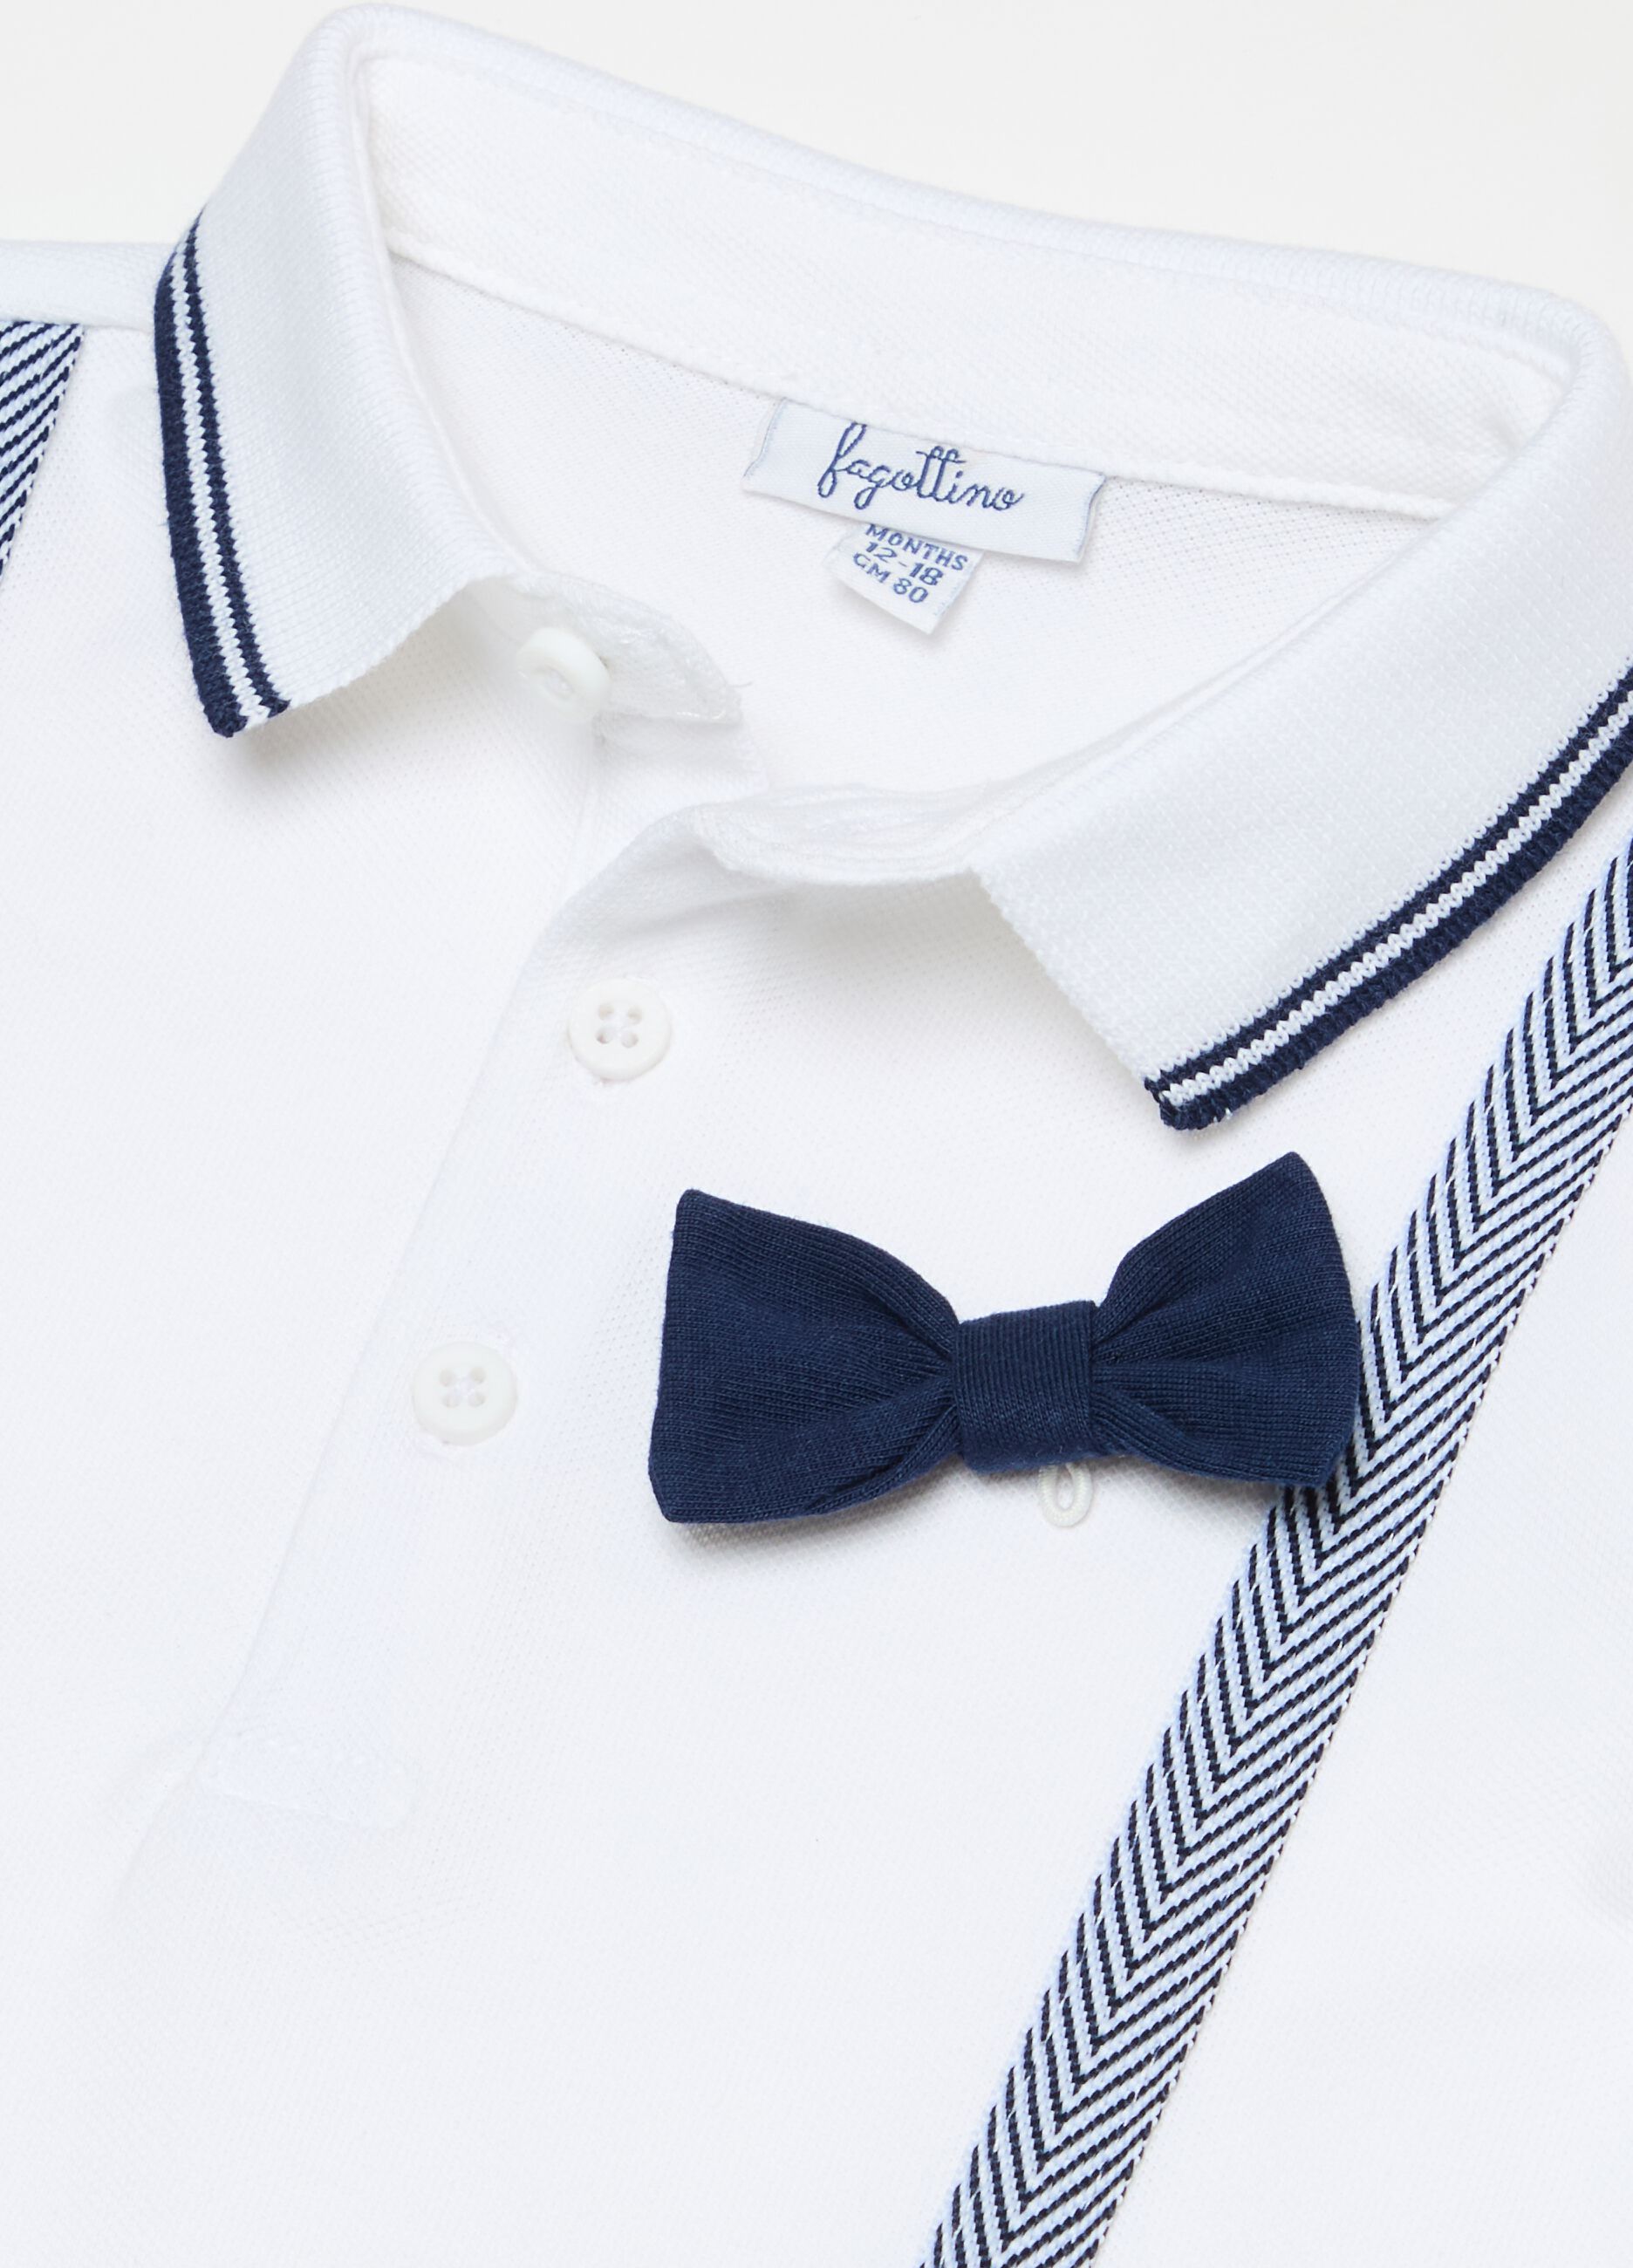 Piquet polo shirt with bow tie and braces